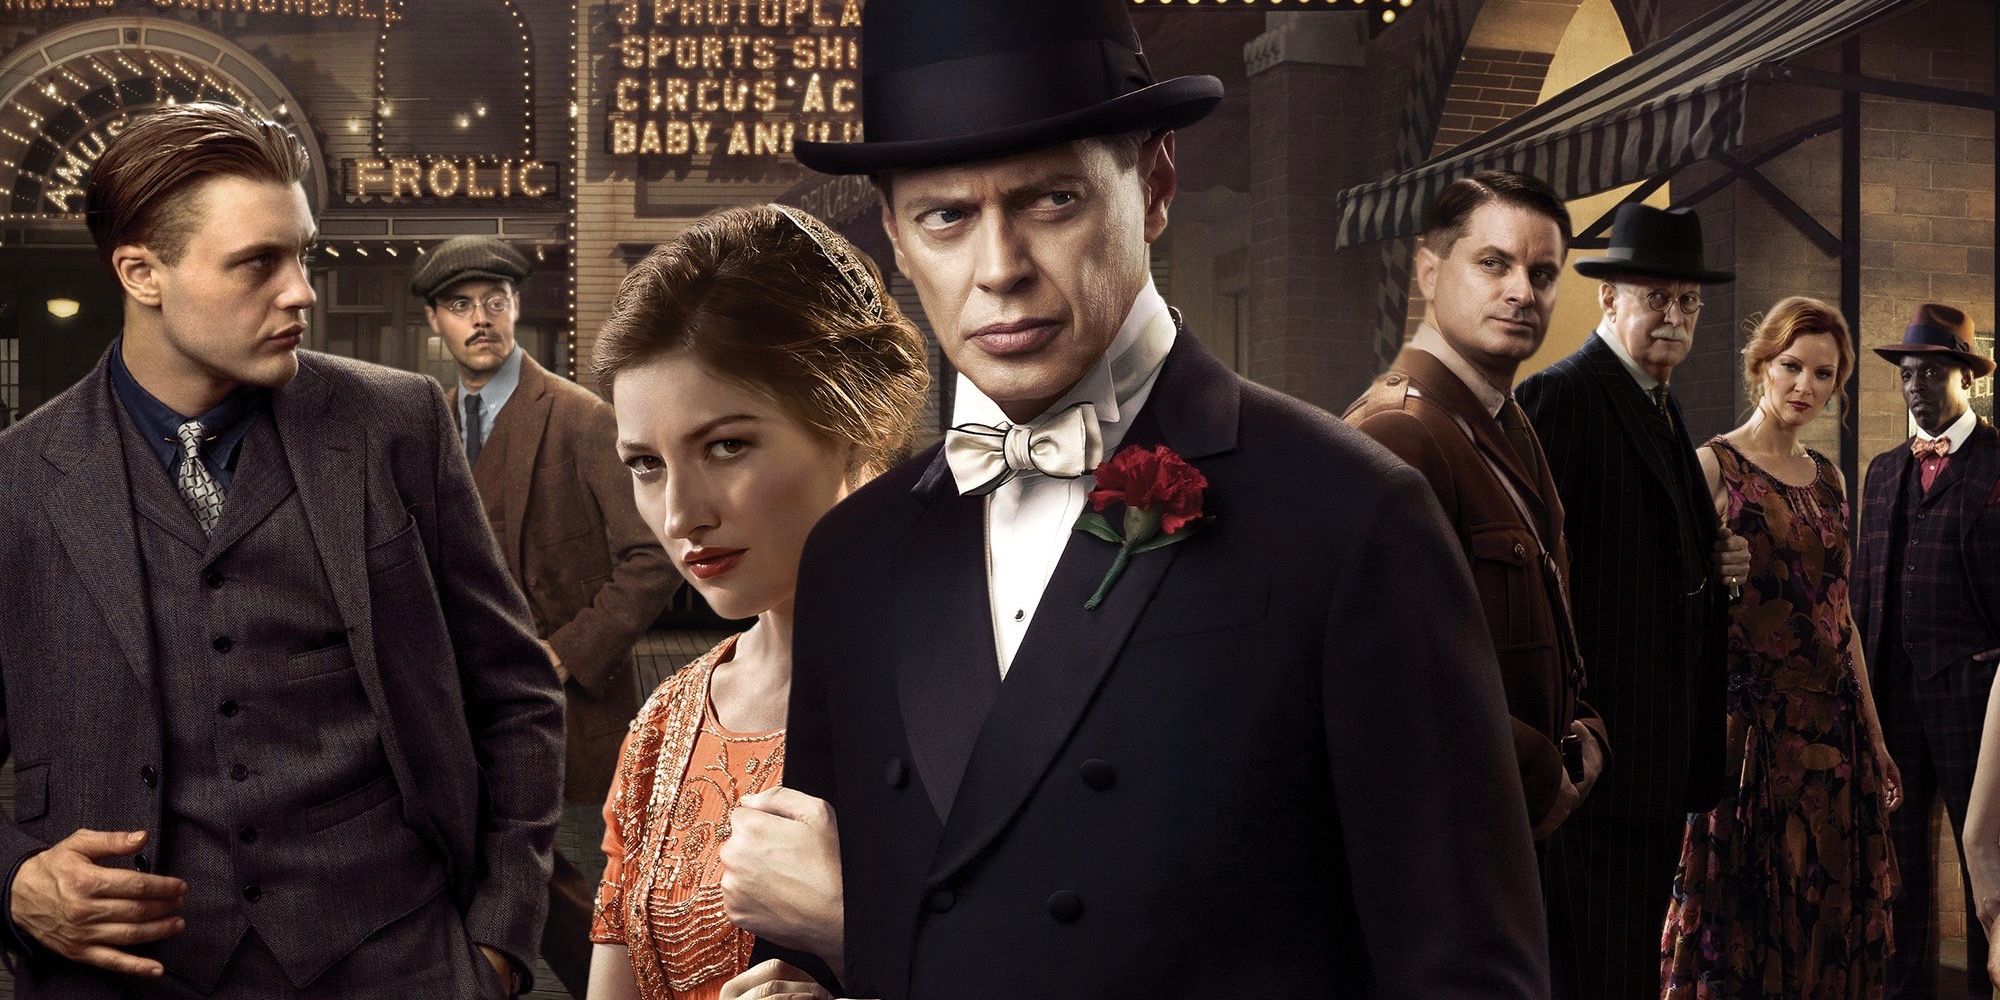 I got the book,what should i expect from this and should i watch the show  before reading? : r/BoardwalkEmpire